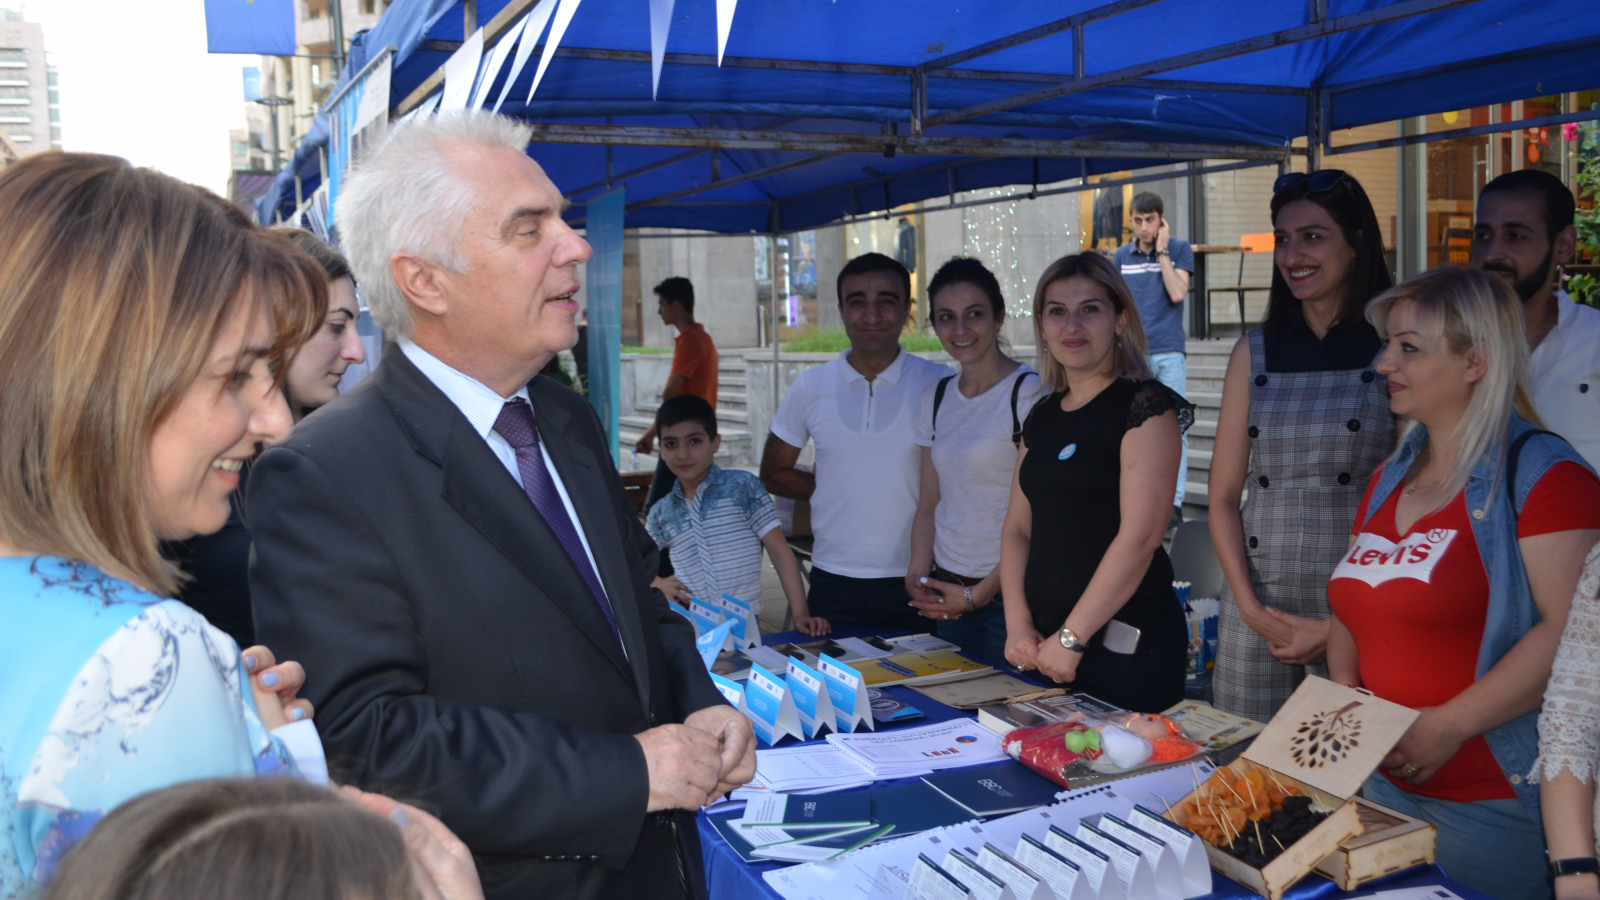 EU4Youth employment project showcases results at Europe Day fair in Armenia